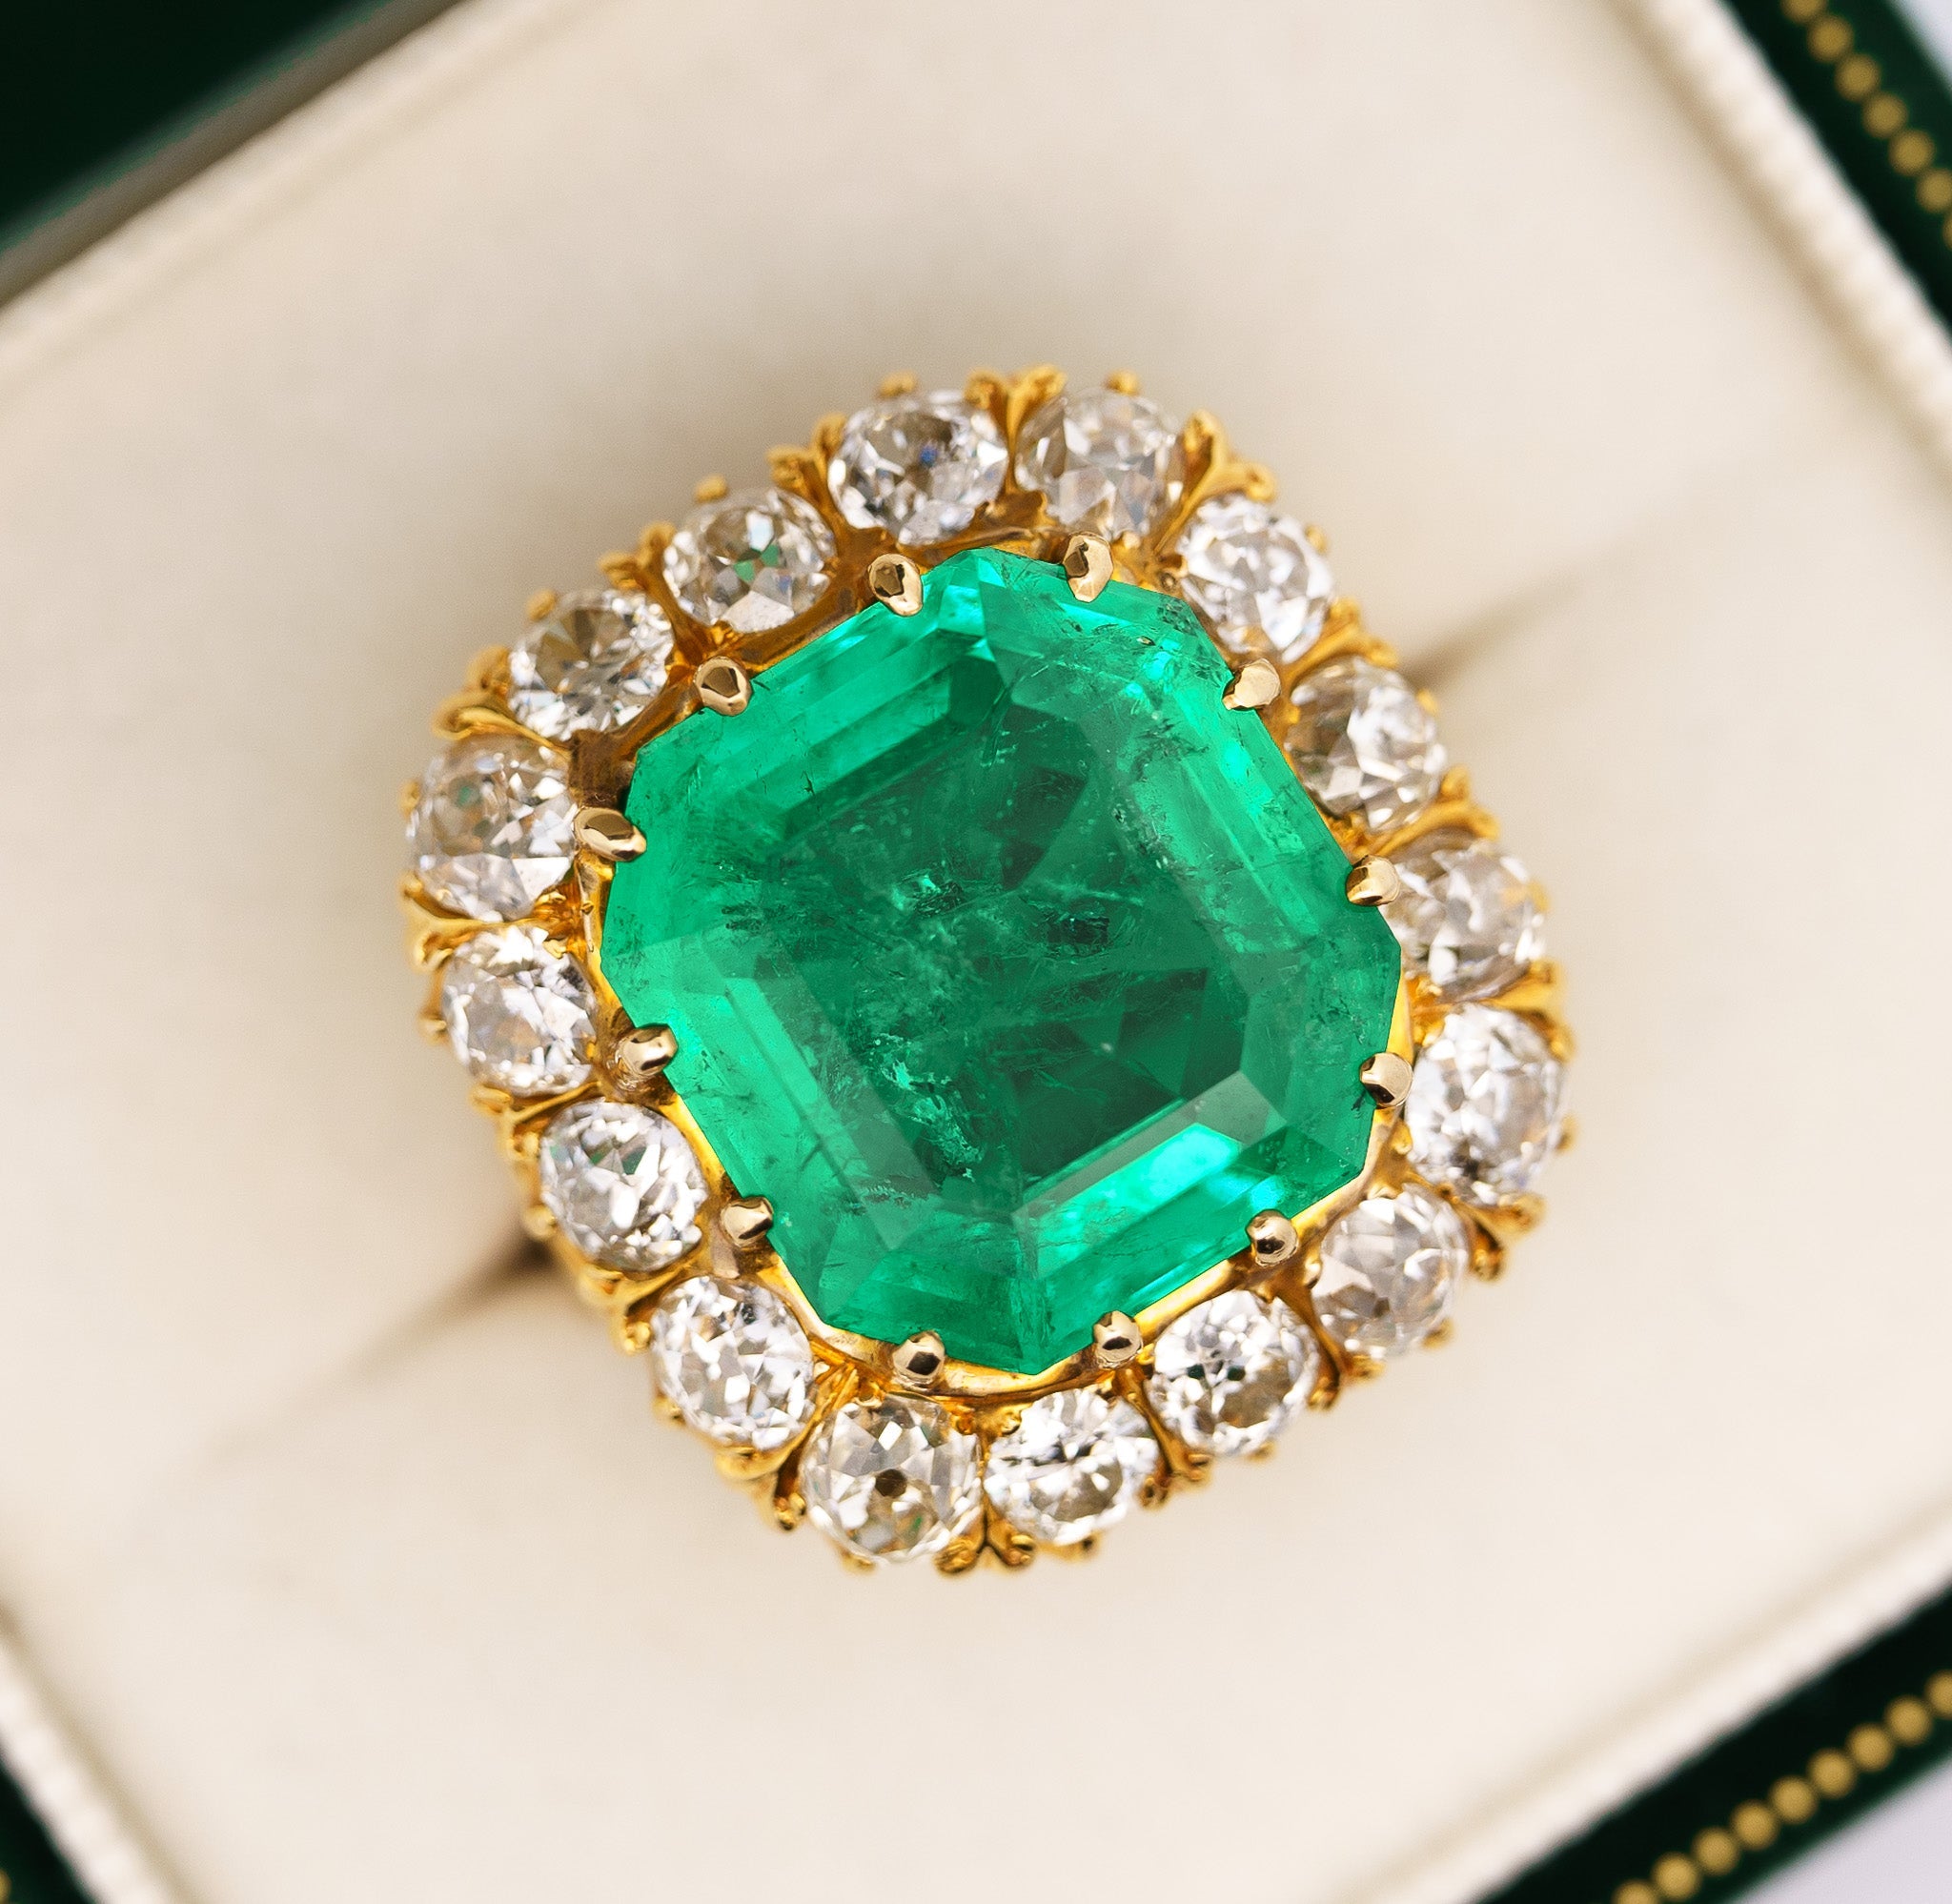 14.51 Carat Insignificant Oil Colombian Emerald & Old Euro Cut Diamond Halo Ring